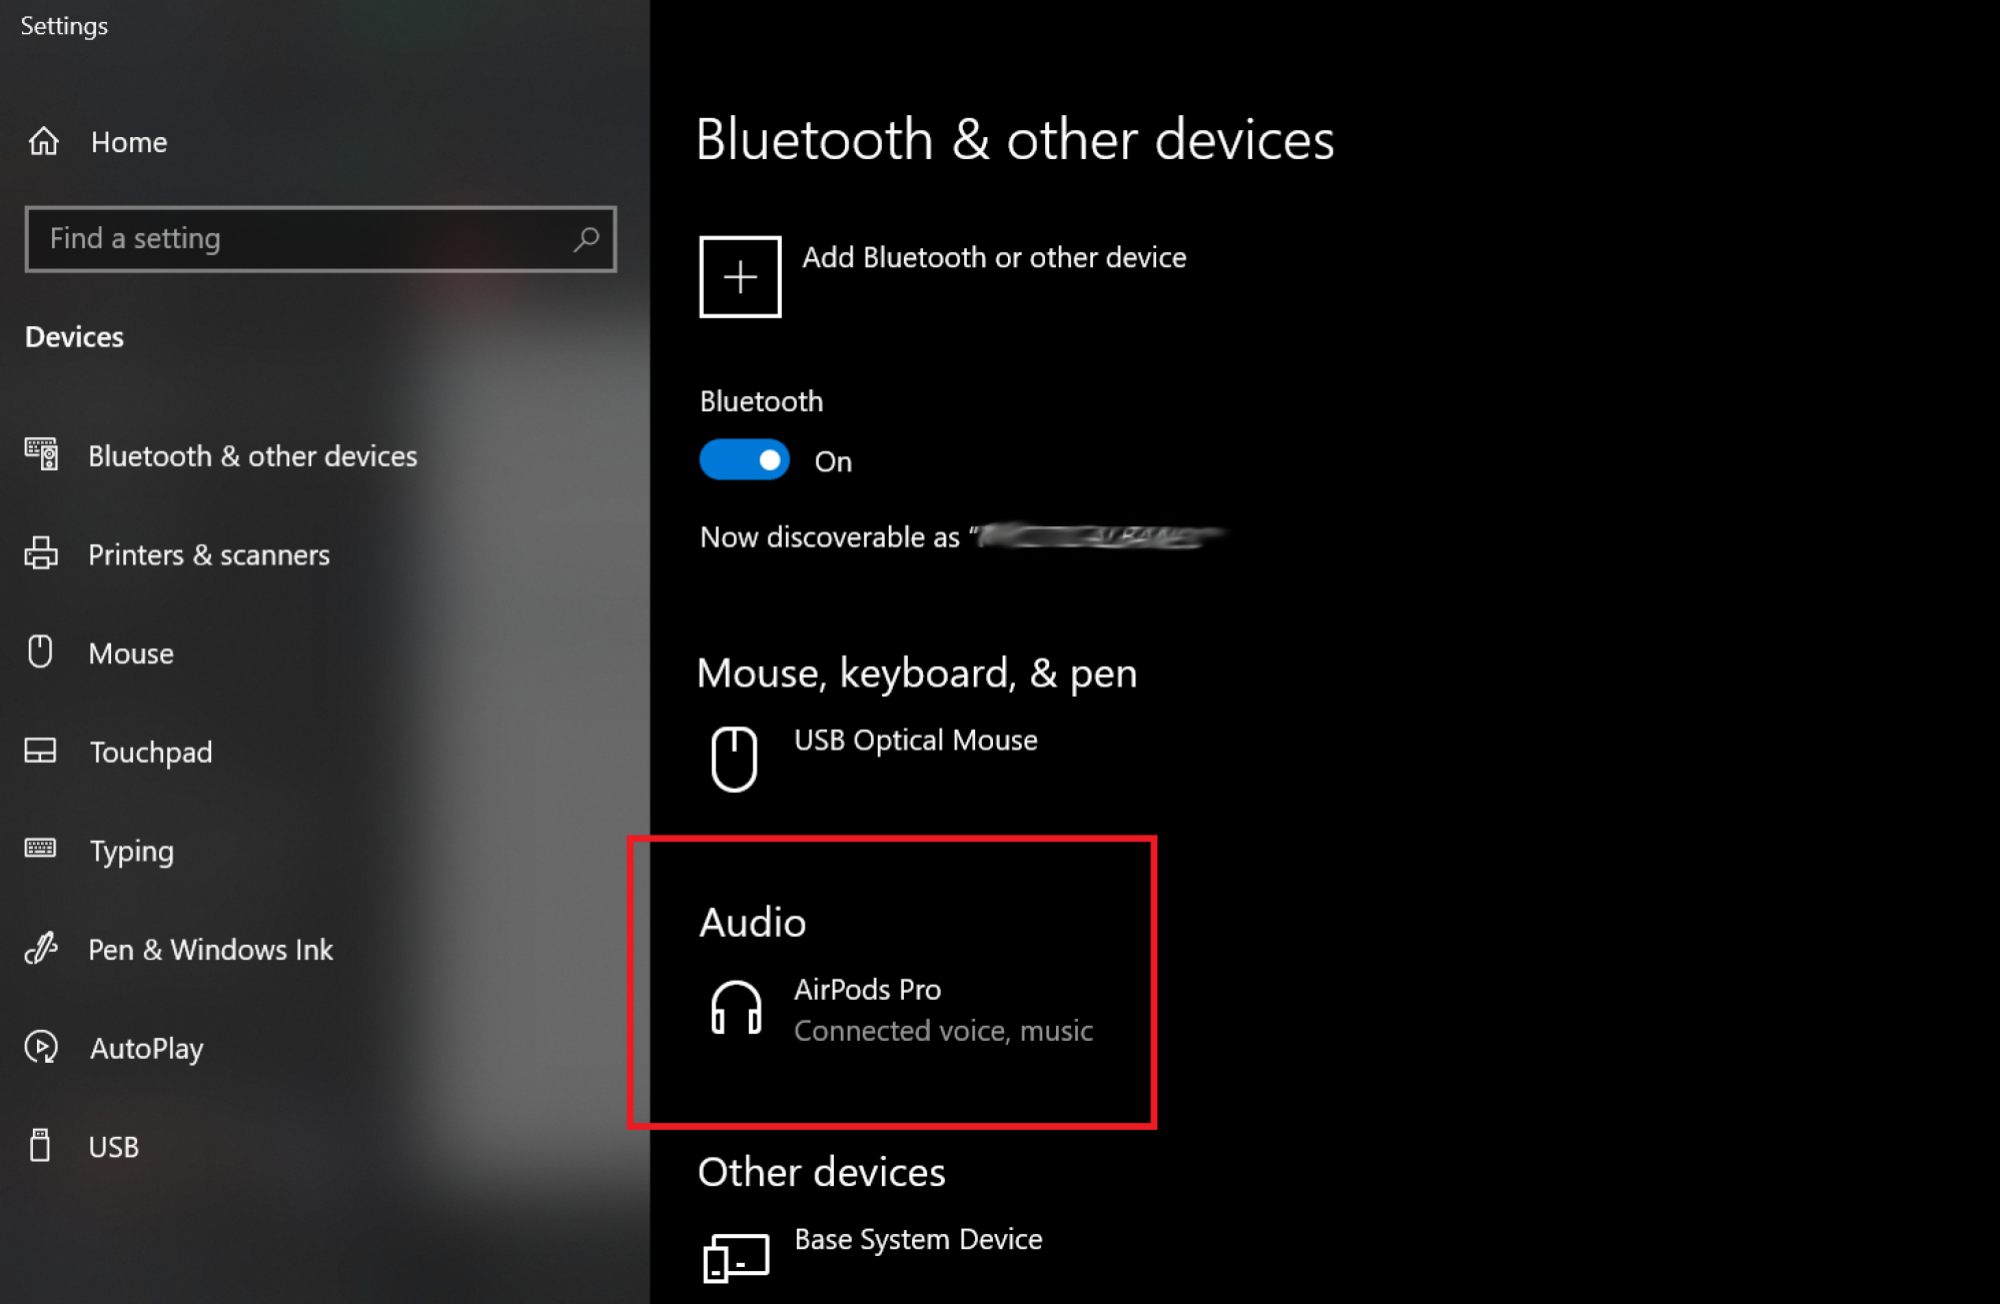 Windows PC settings showing the AirPods in a list of available devices